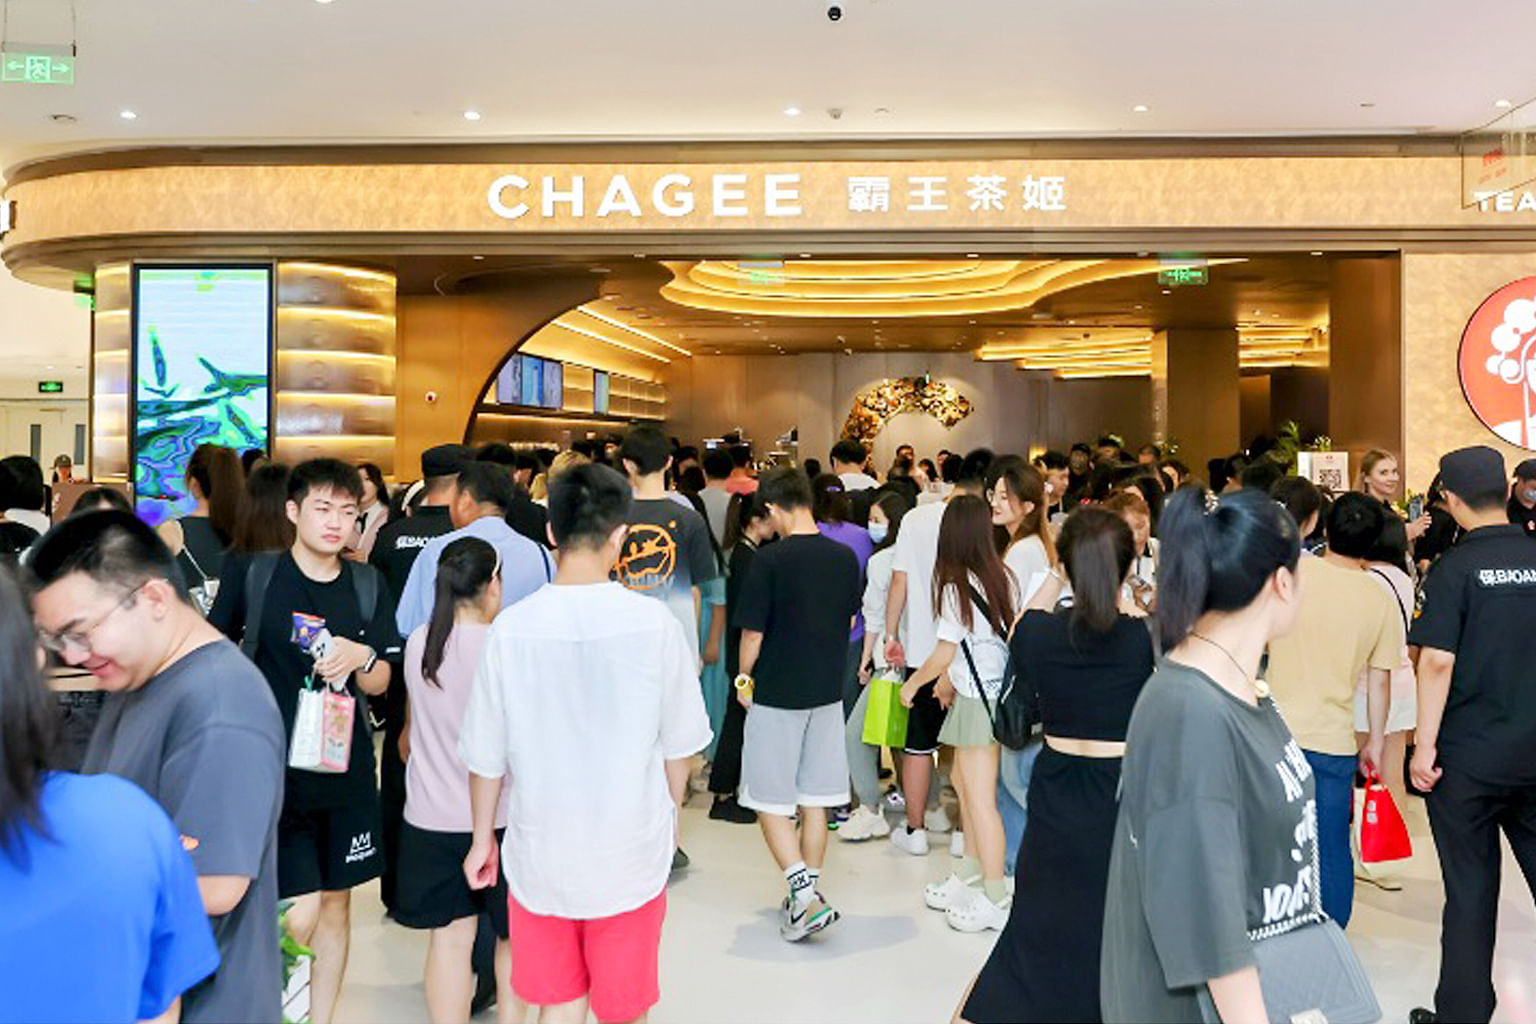 Crowds at Chagee Beijing store opening